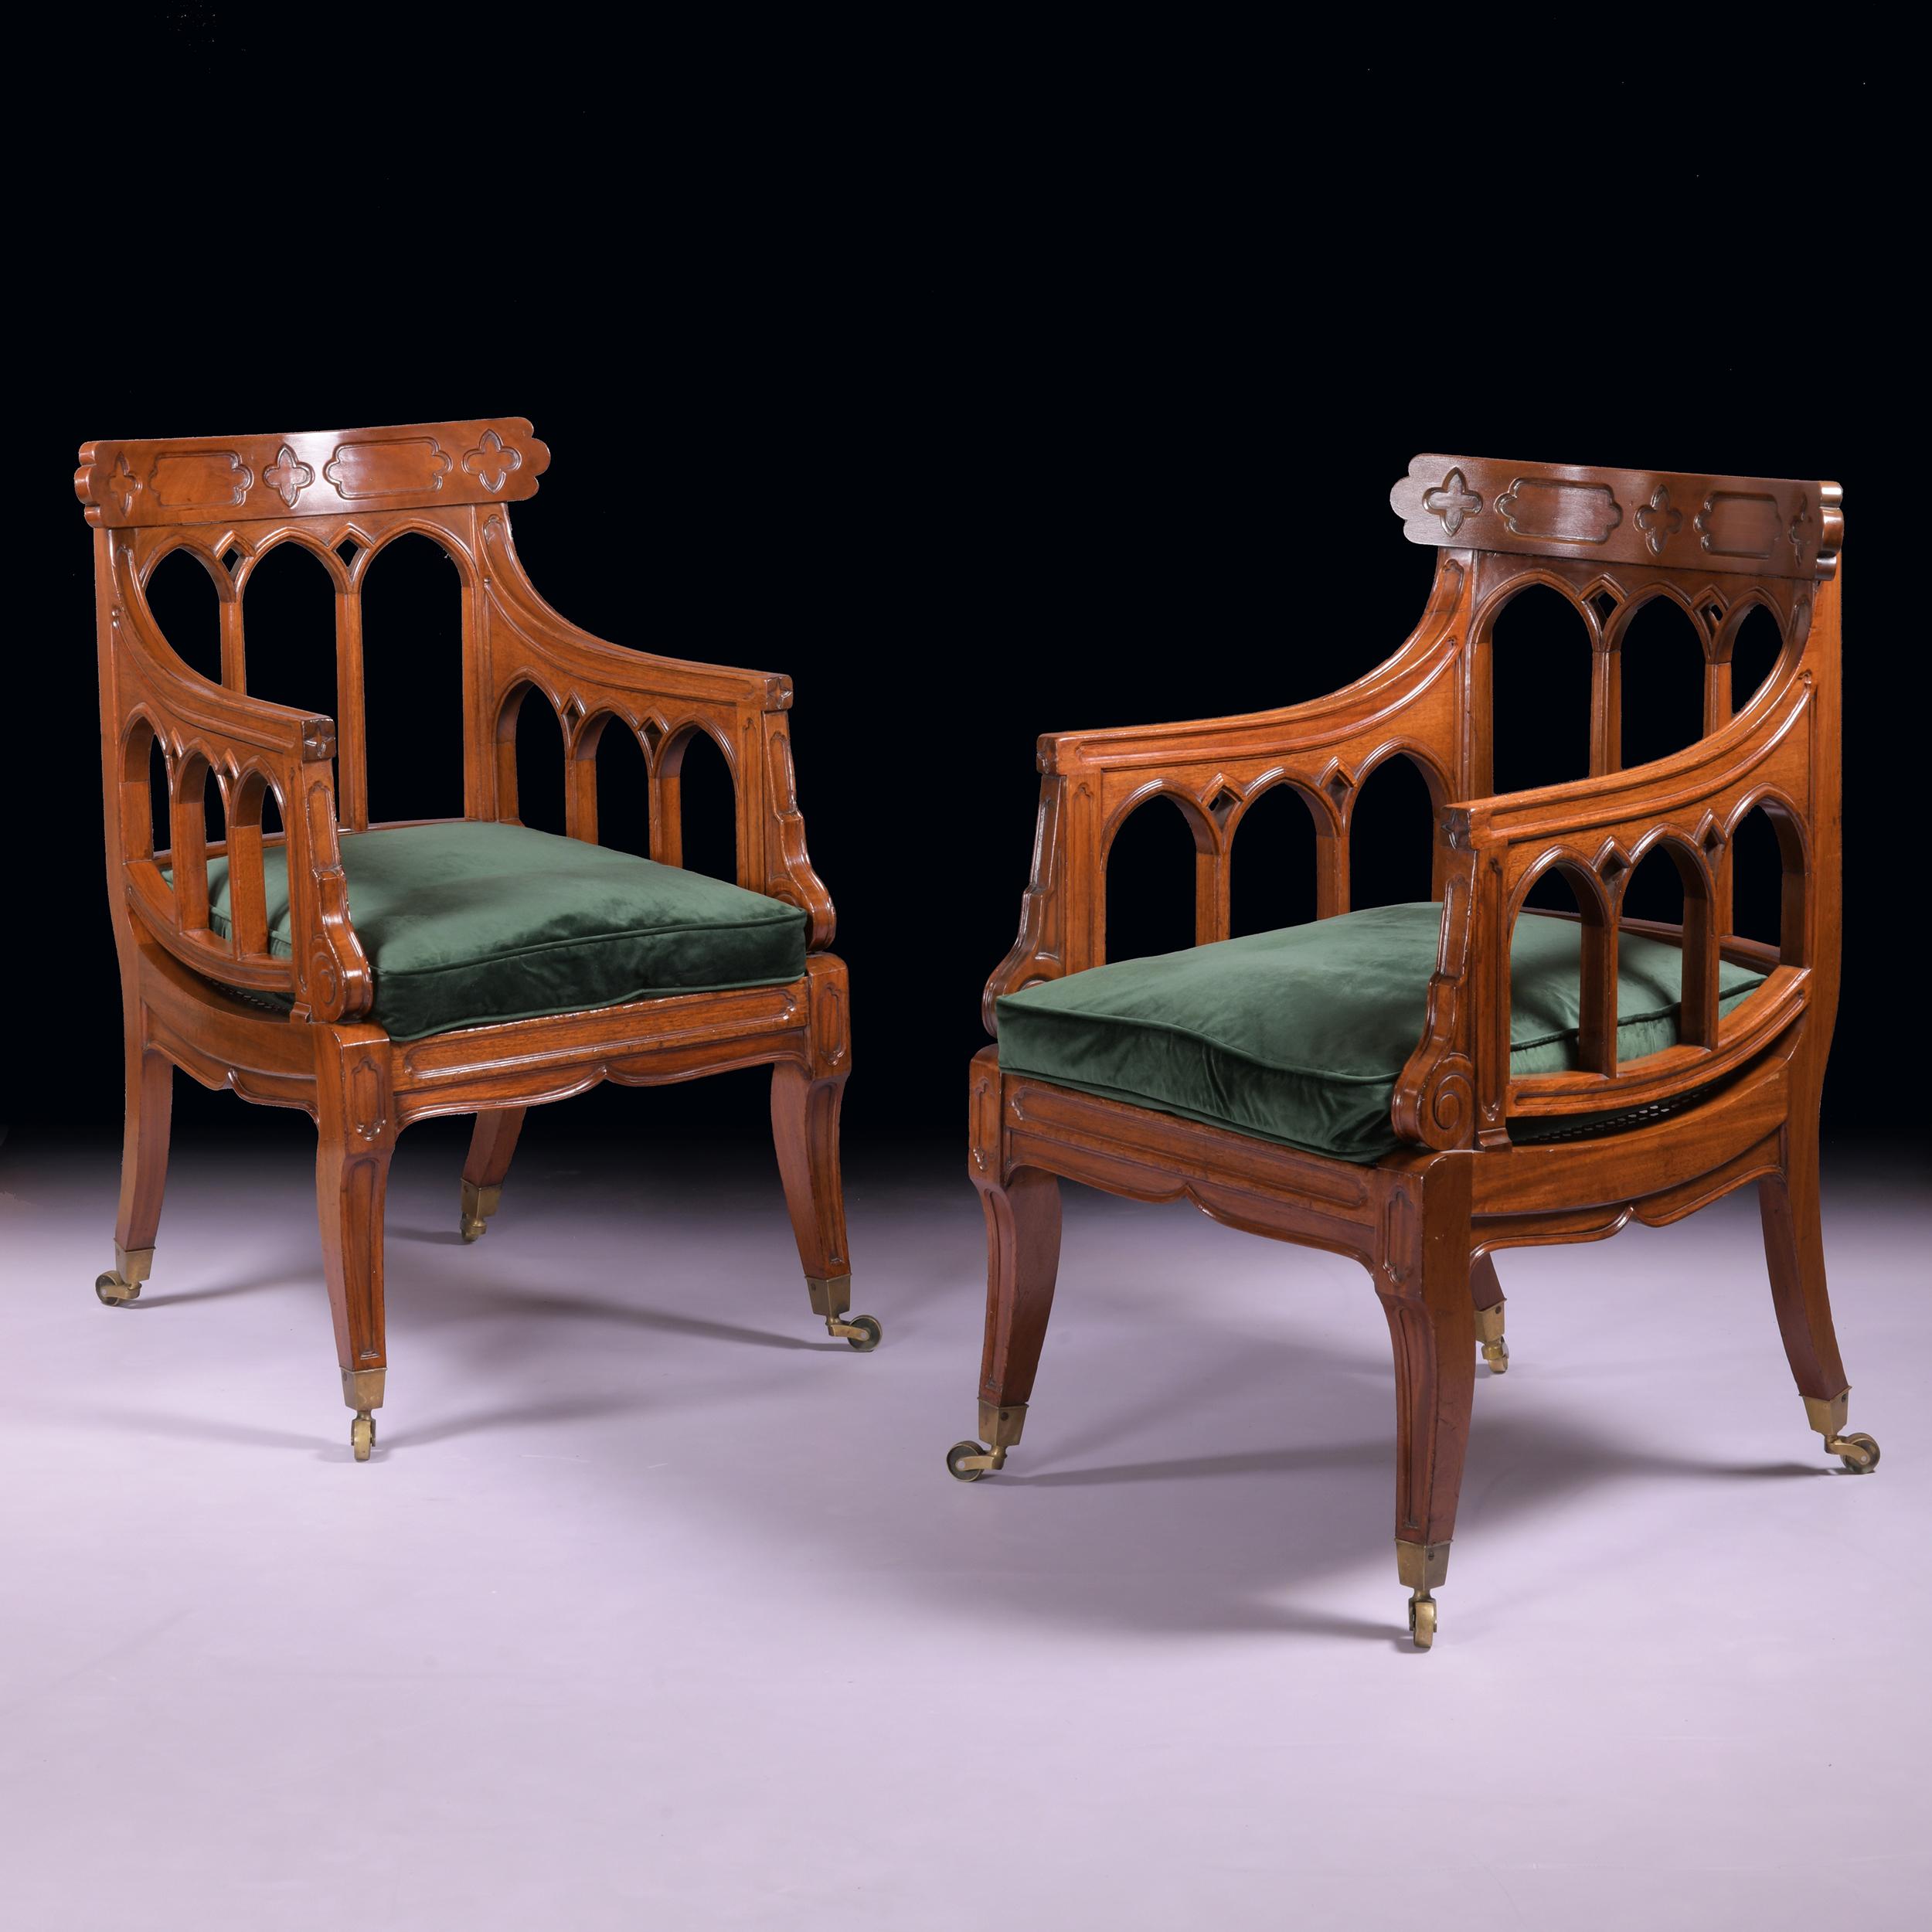 A superb pair of Regency mahogany Gothic revival armchairs in the Manner of William Pordin, the bowed crest rails, centred by quatrefoils, above Gothic arches, conforming down swept channelled arms, deep caned seat, on panelled legs, with brass box